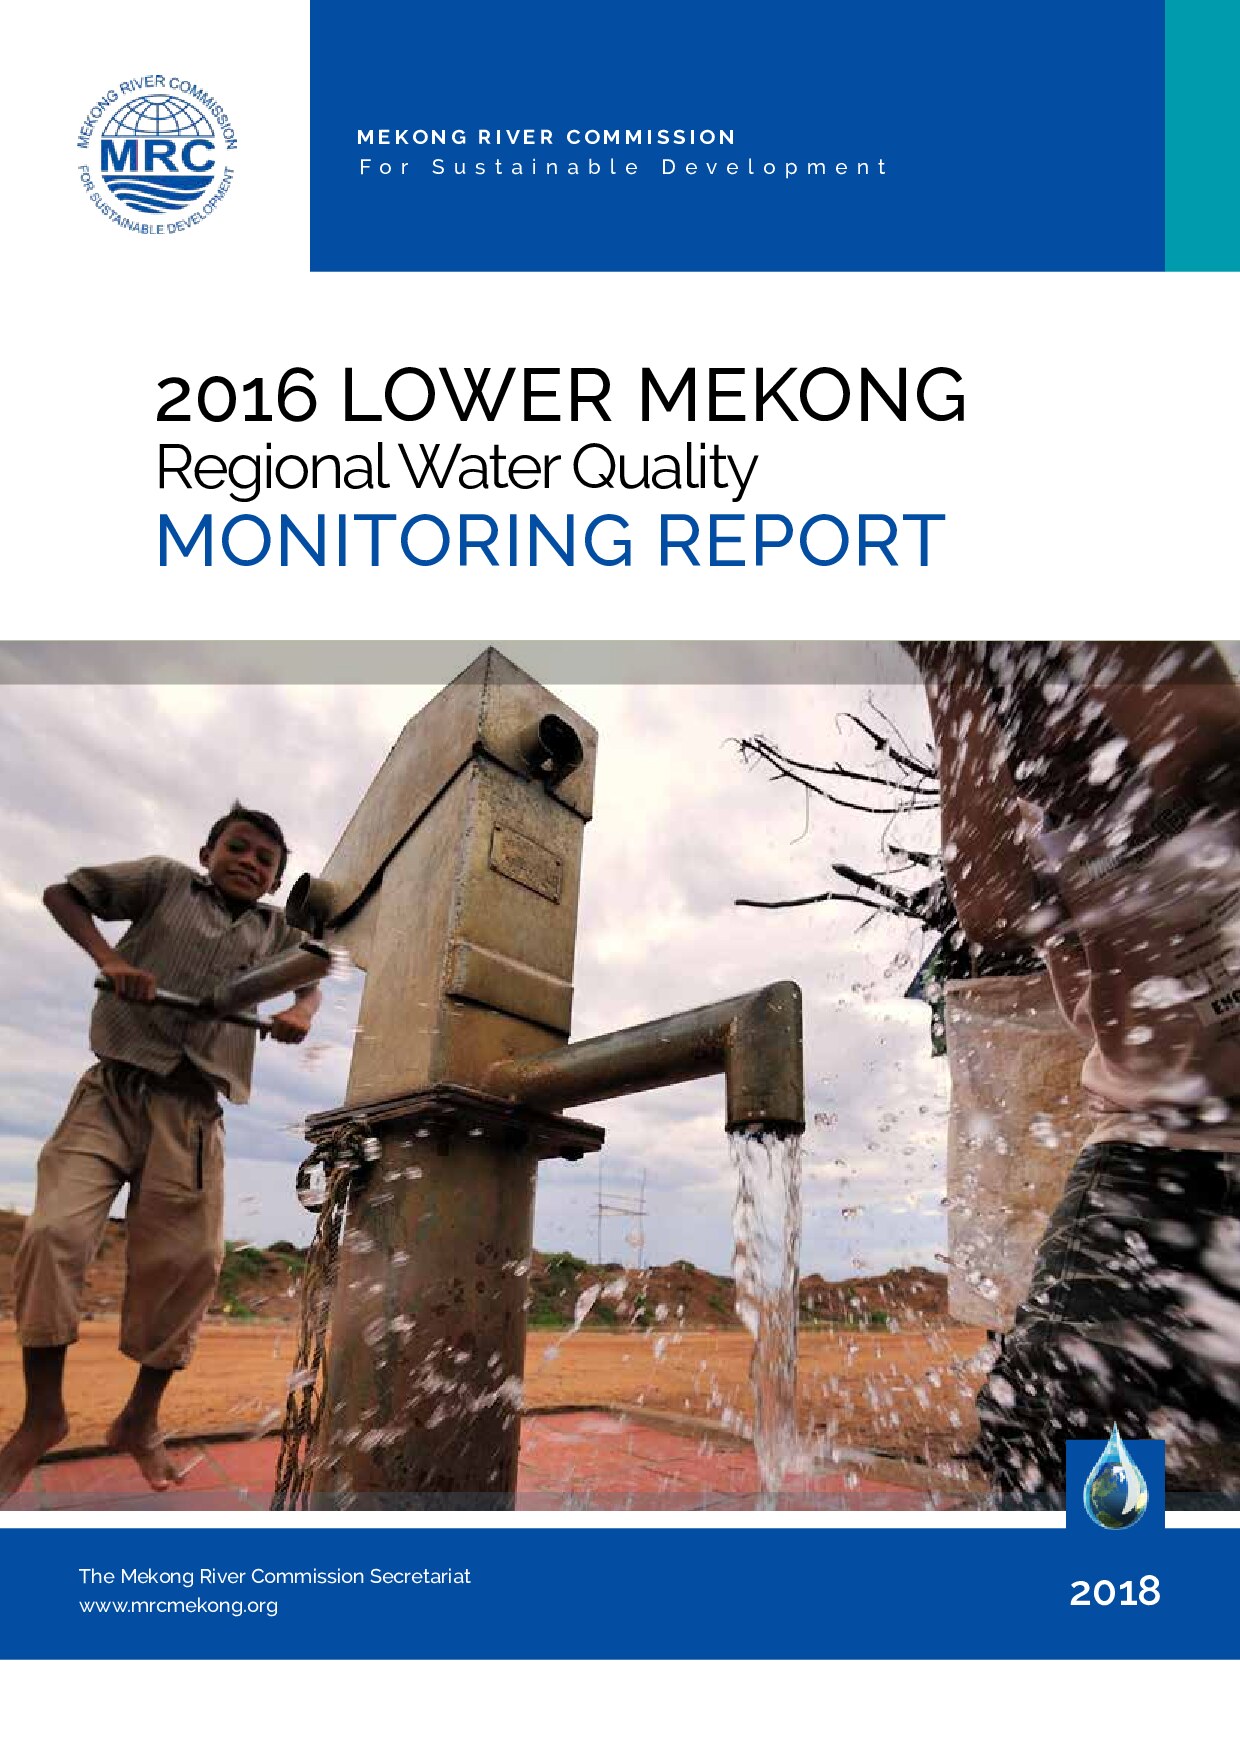 2016-Lower-Mekong-Regional-Water-Quality-Monitoring-Report-14June18-L-Res